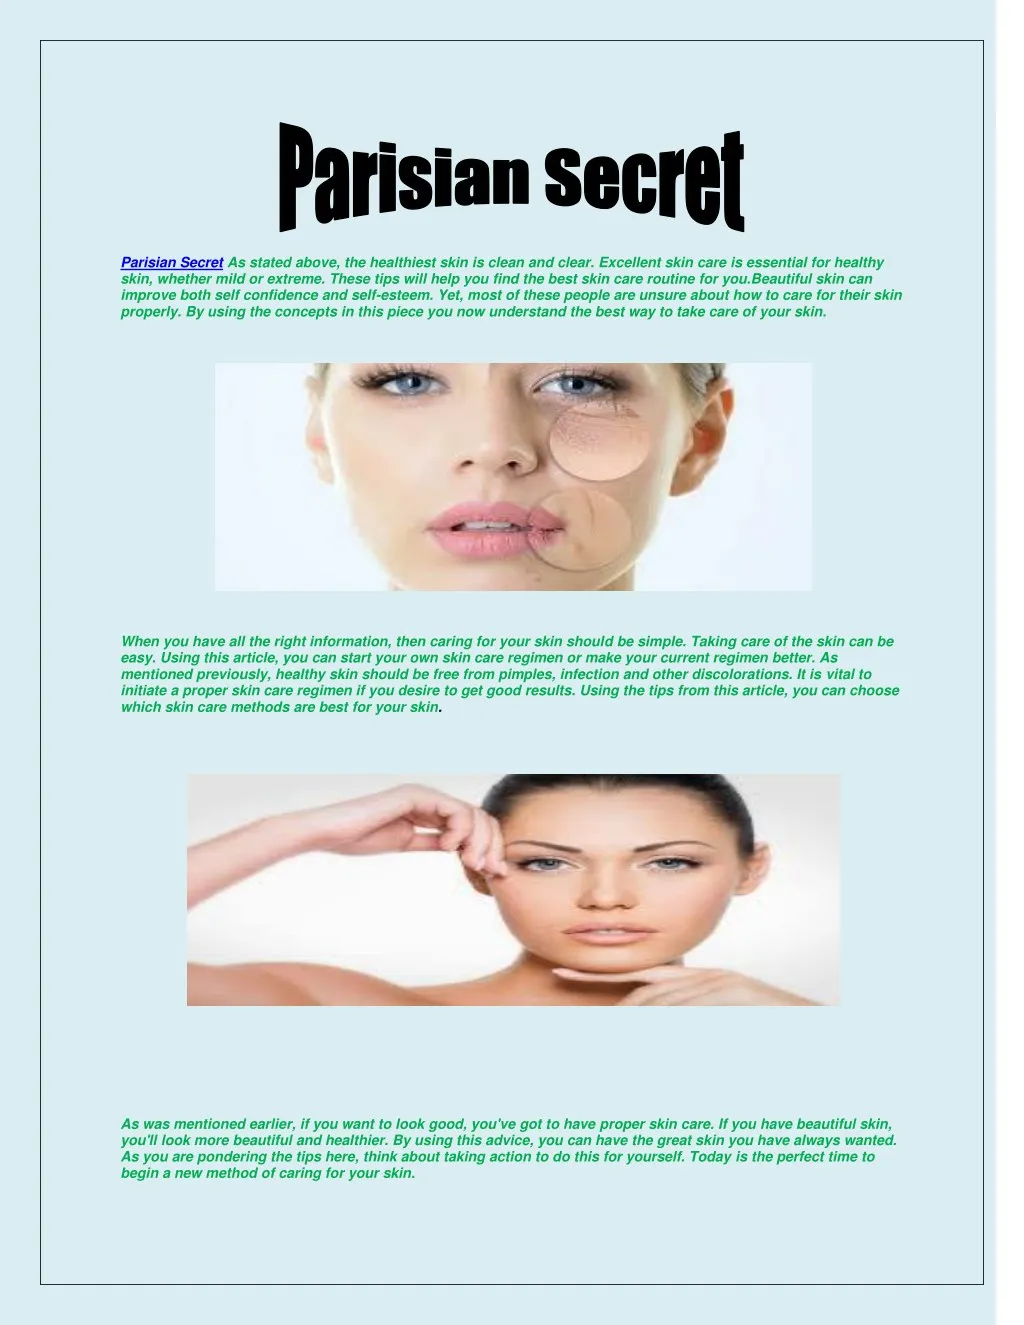 parisian secret as stated above the healthiest